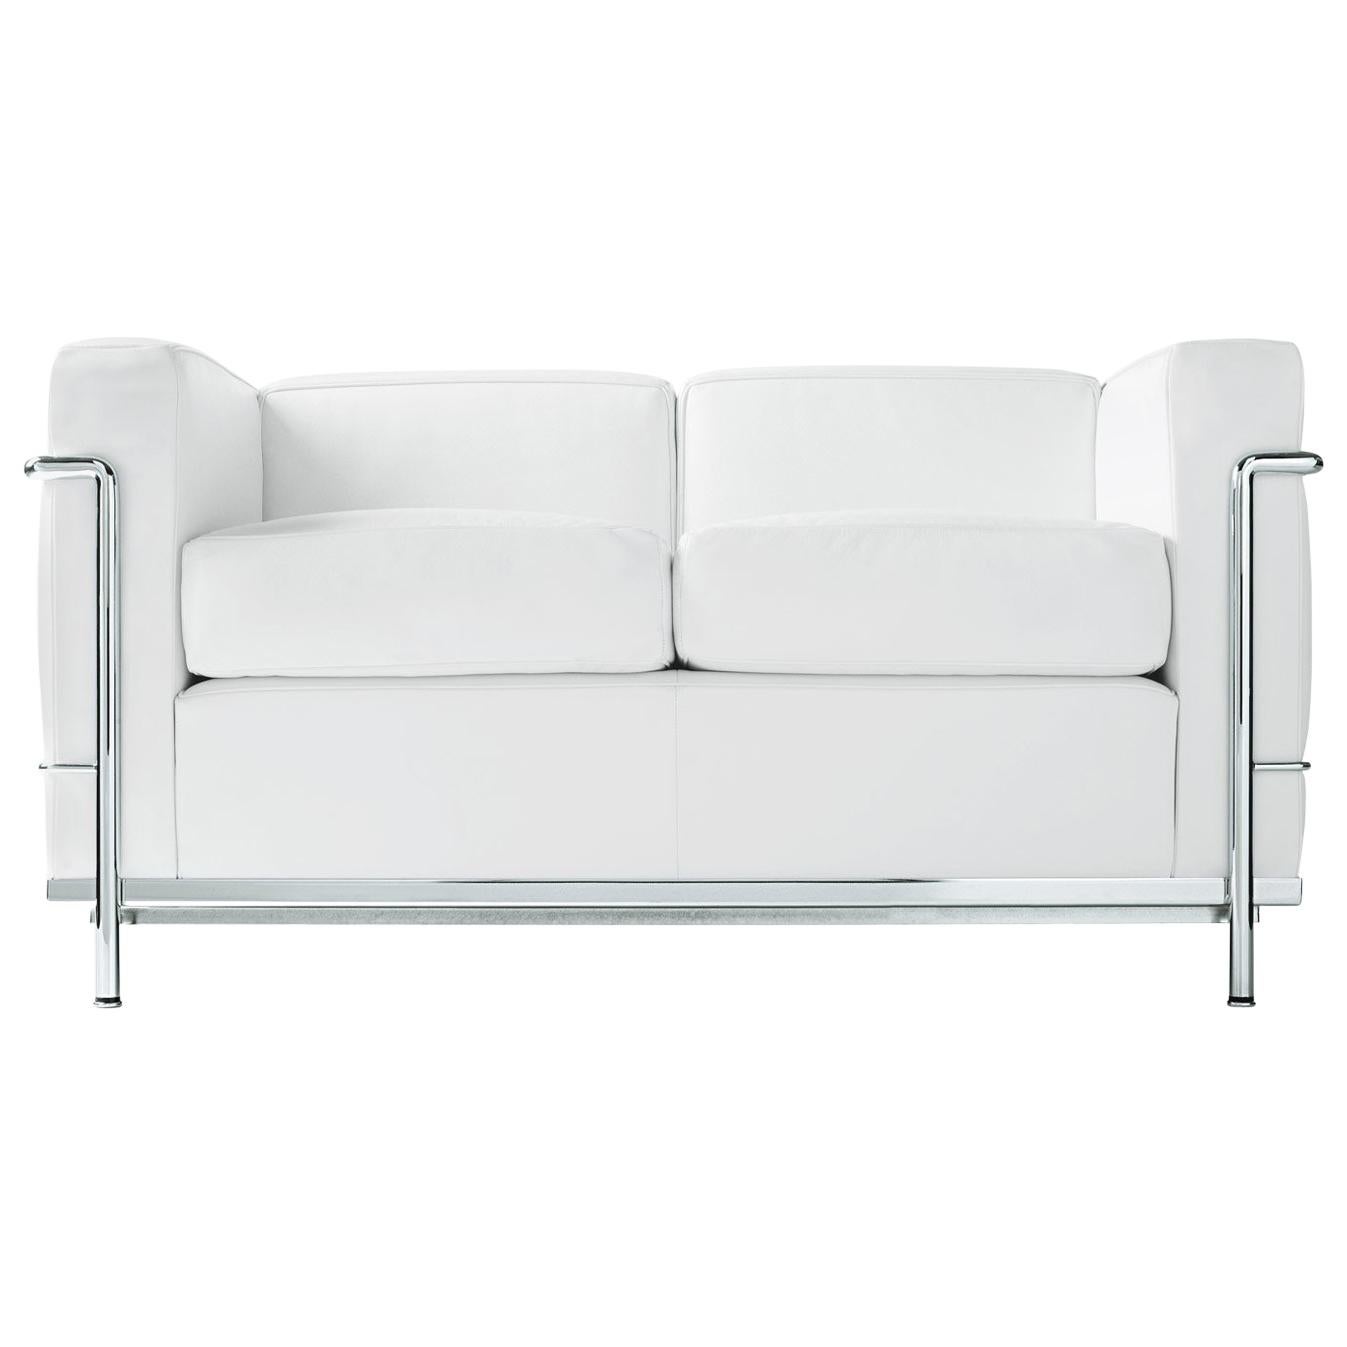 Contemporary Le Corbusier, Pierre Jeanneret, Charlotte Perriand LC2 Two-Seat Sofa by Cassina For Sale